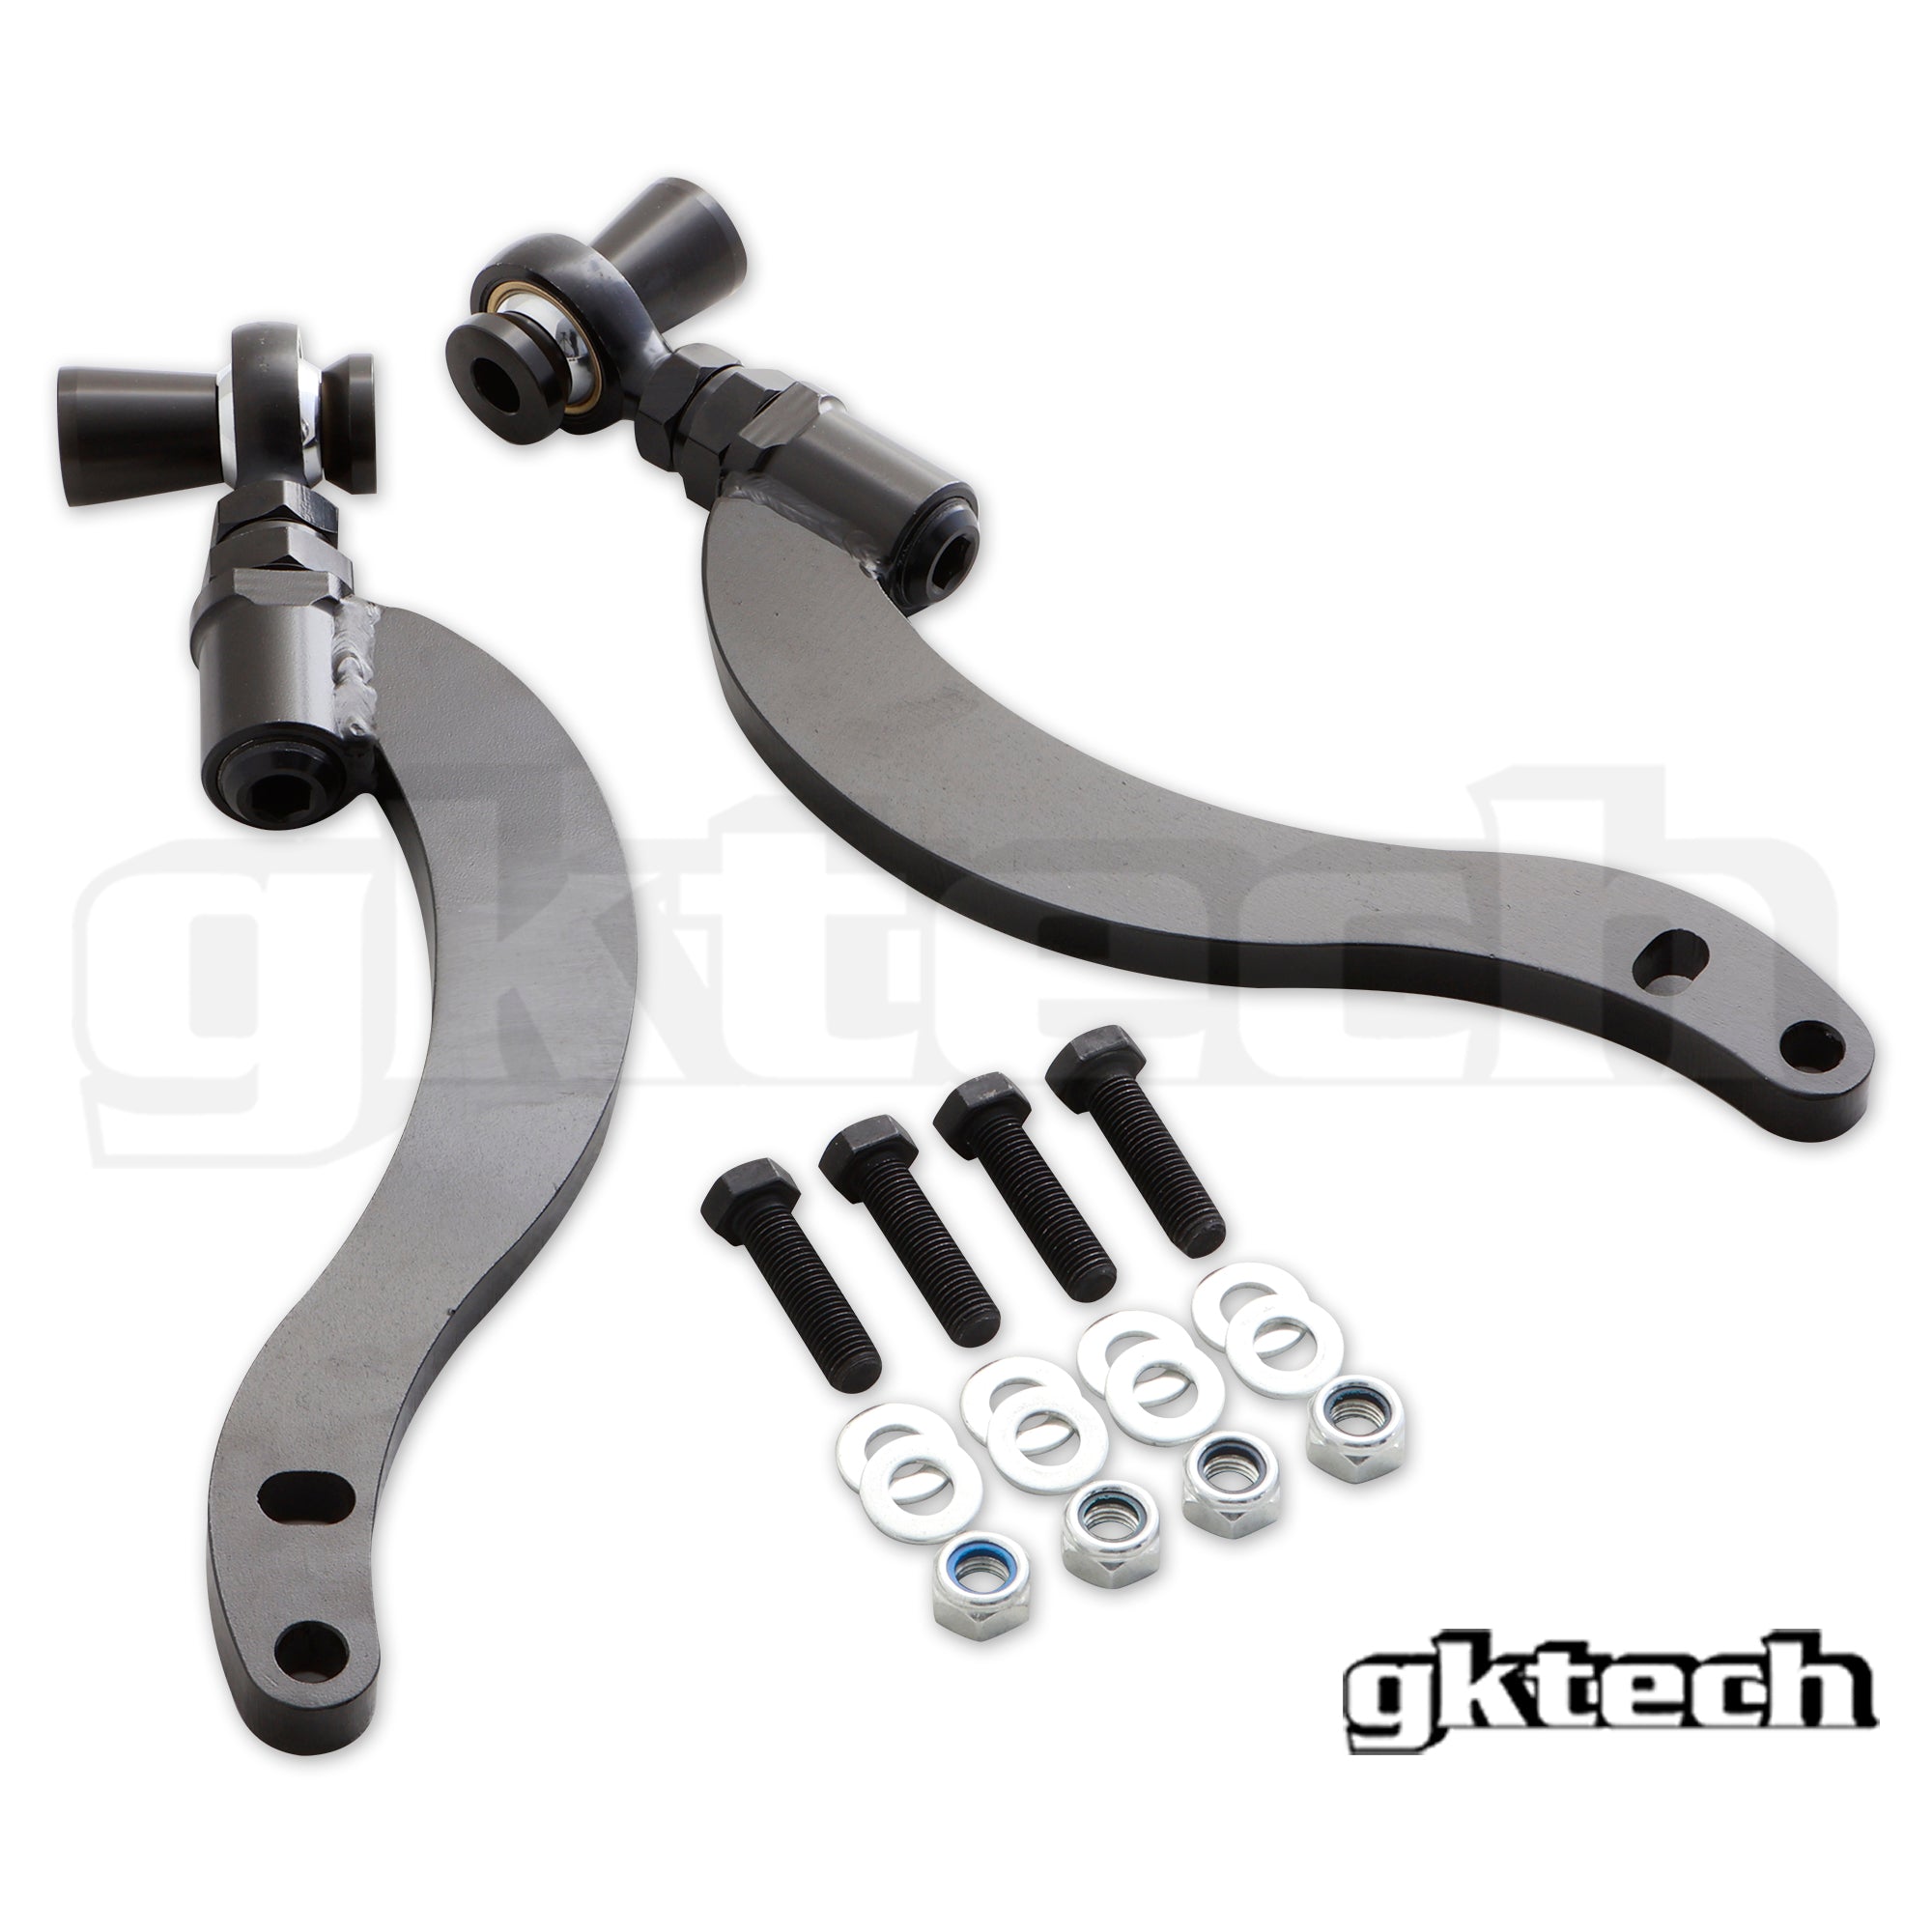 V5 - S14/S15/R33 high clearance caster arms